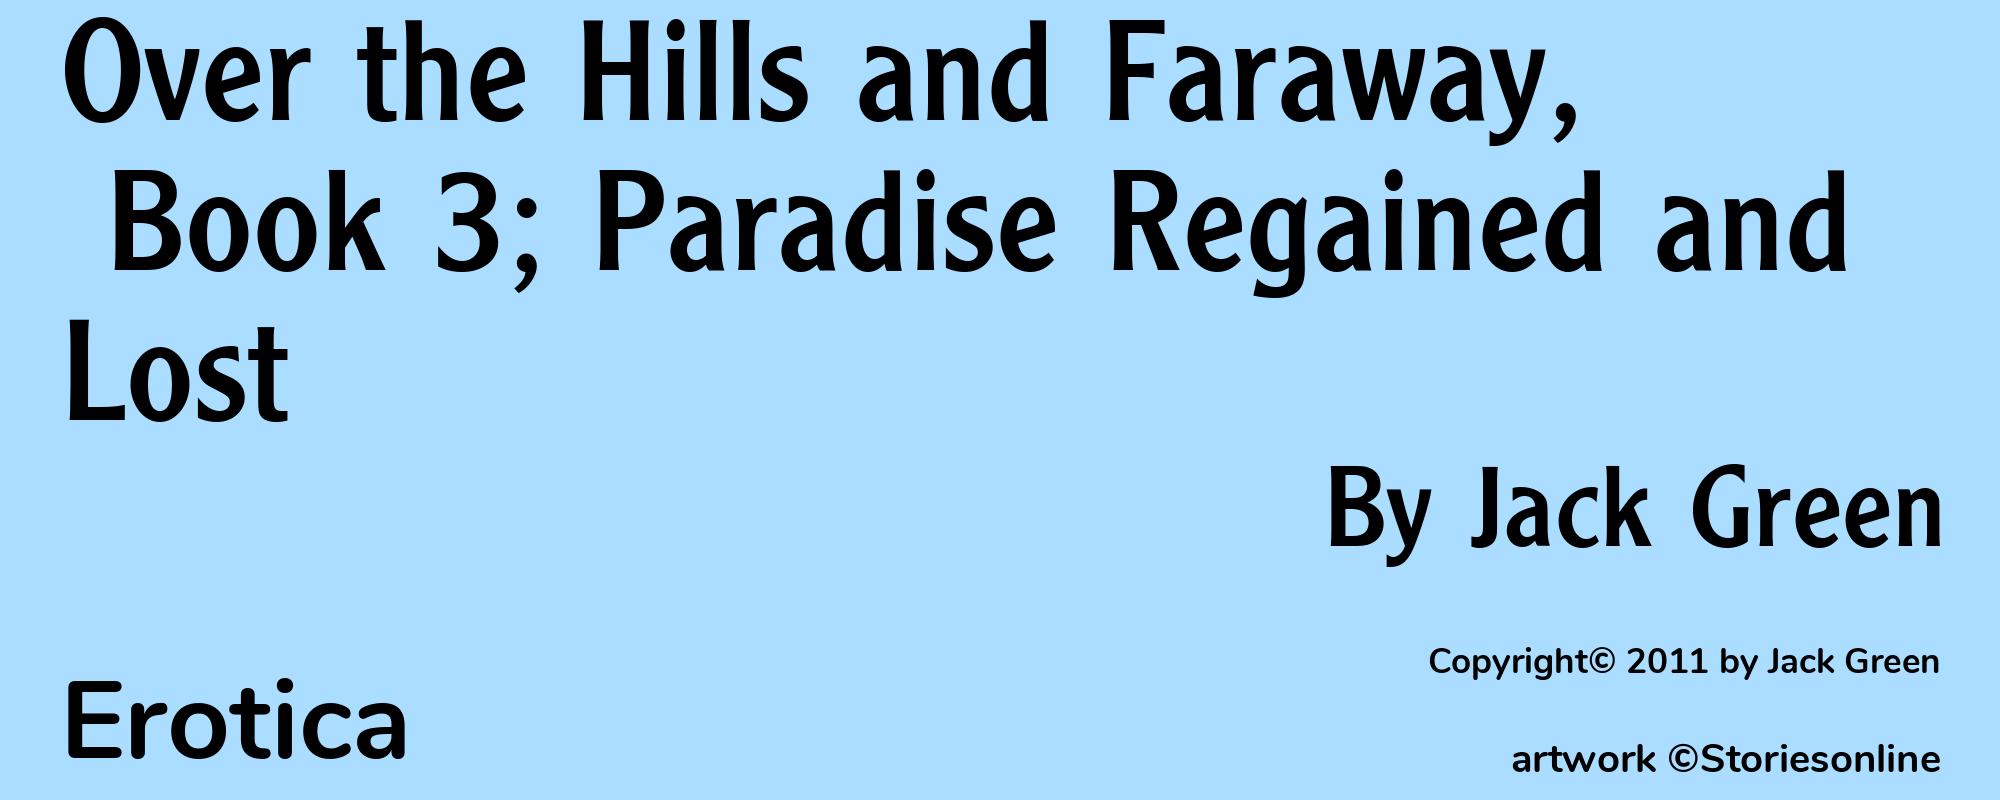 Over the Hills and Faraway, Book 3; Paradise Regained and Lost - Cover